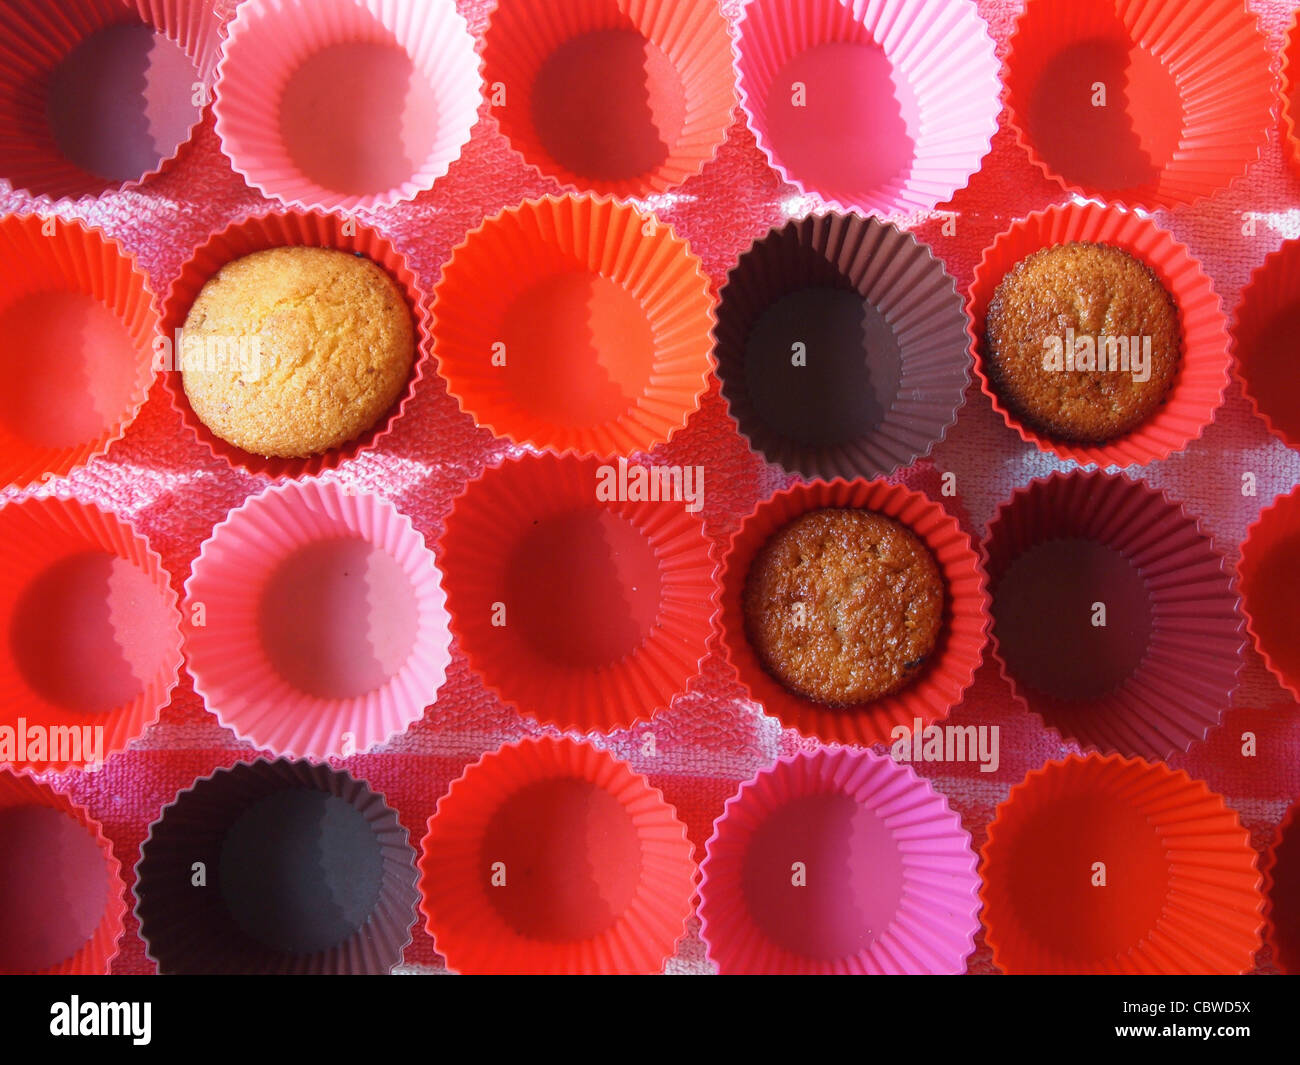 Muffins and empty cake cases Stock Photo